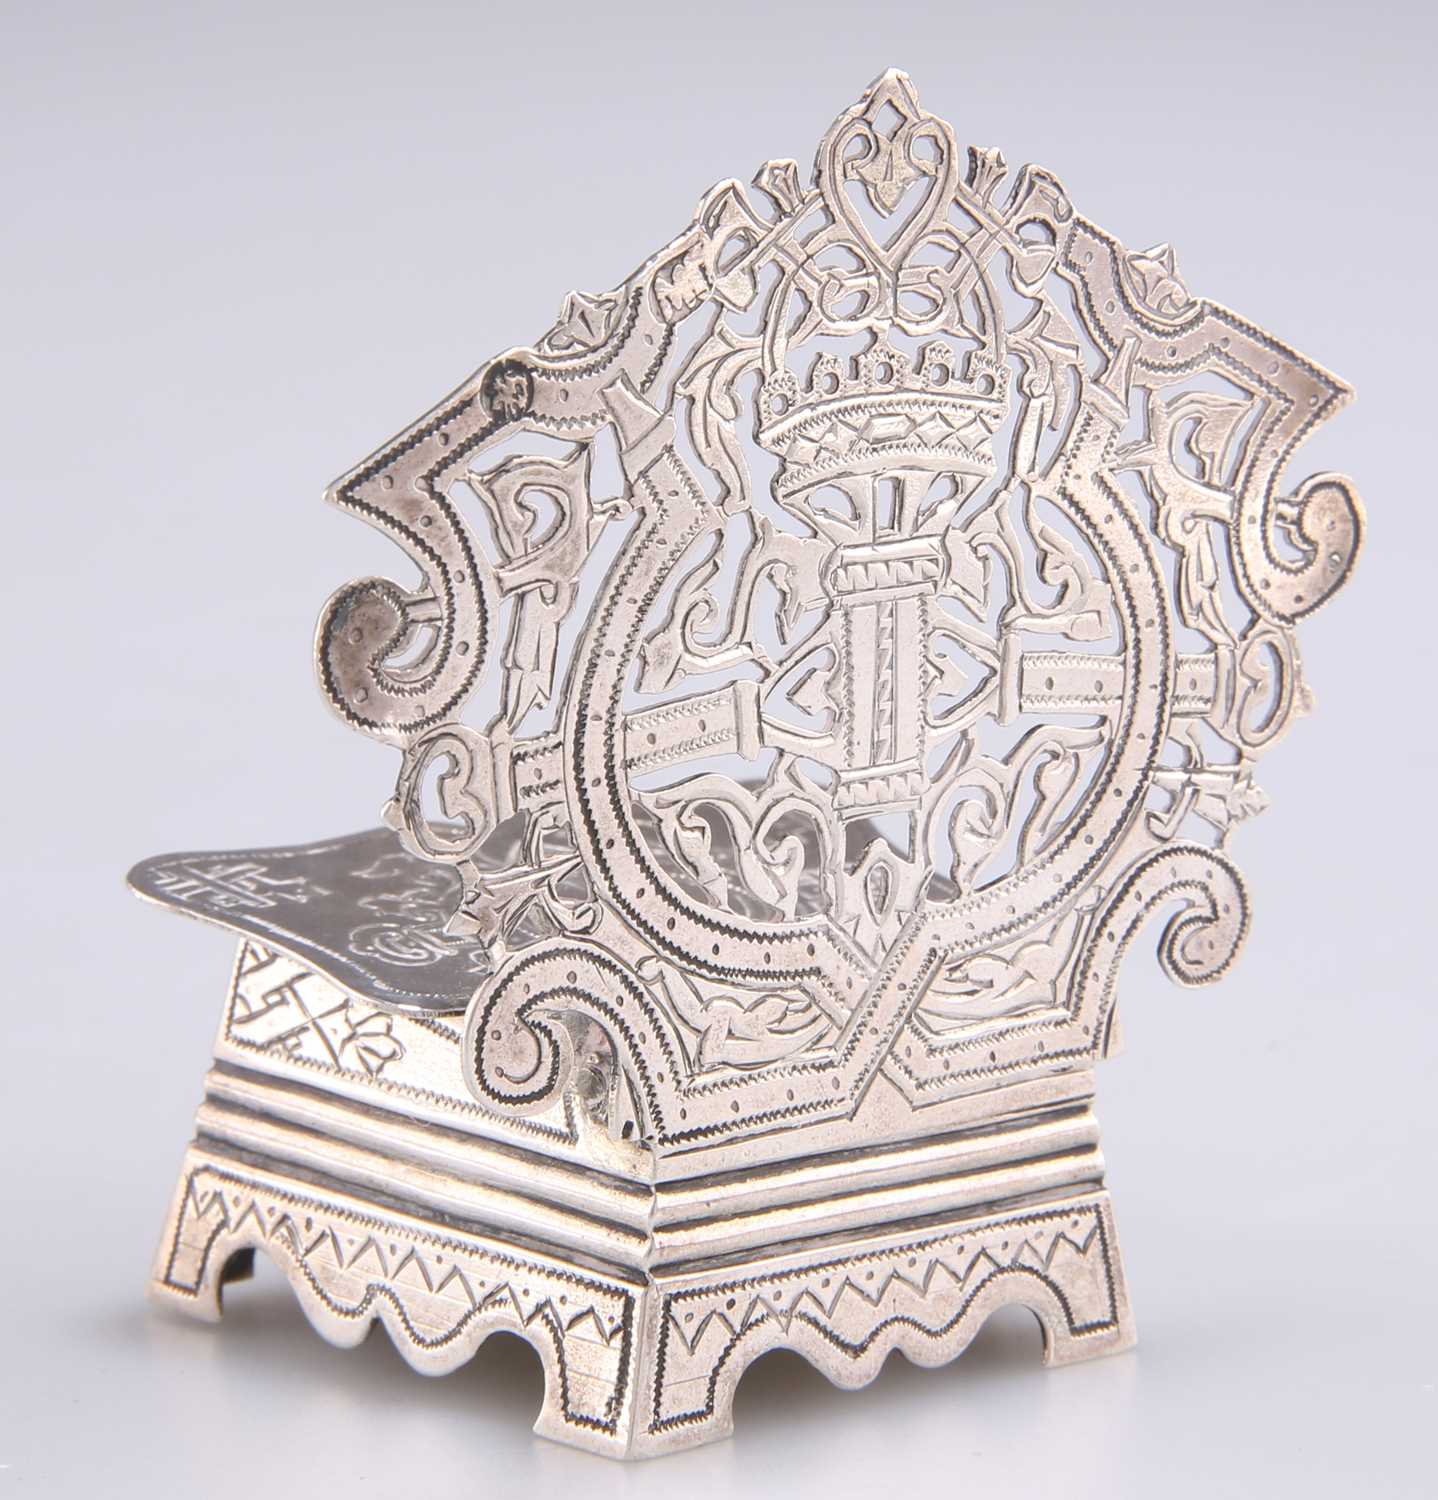 A LATE 19TH CENTURY RUSSIAN SILVER SALT THRONE - Image 2 of 3